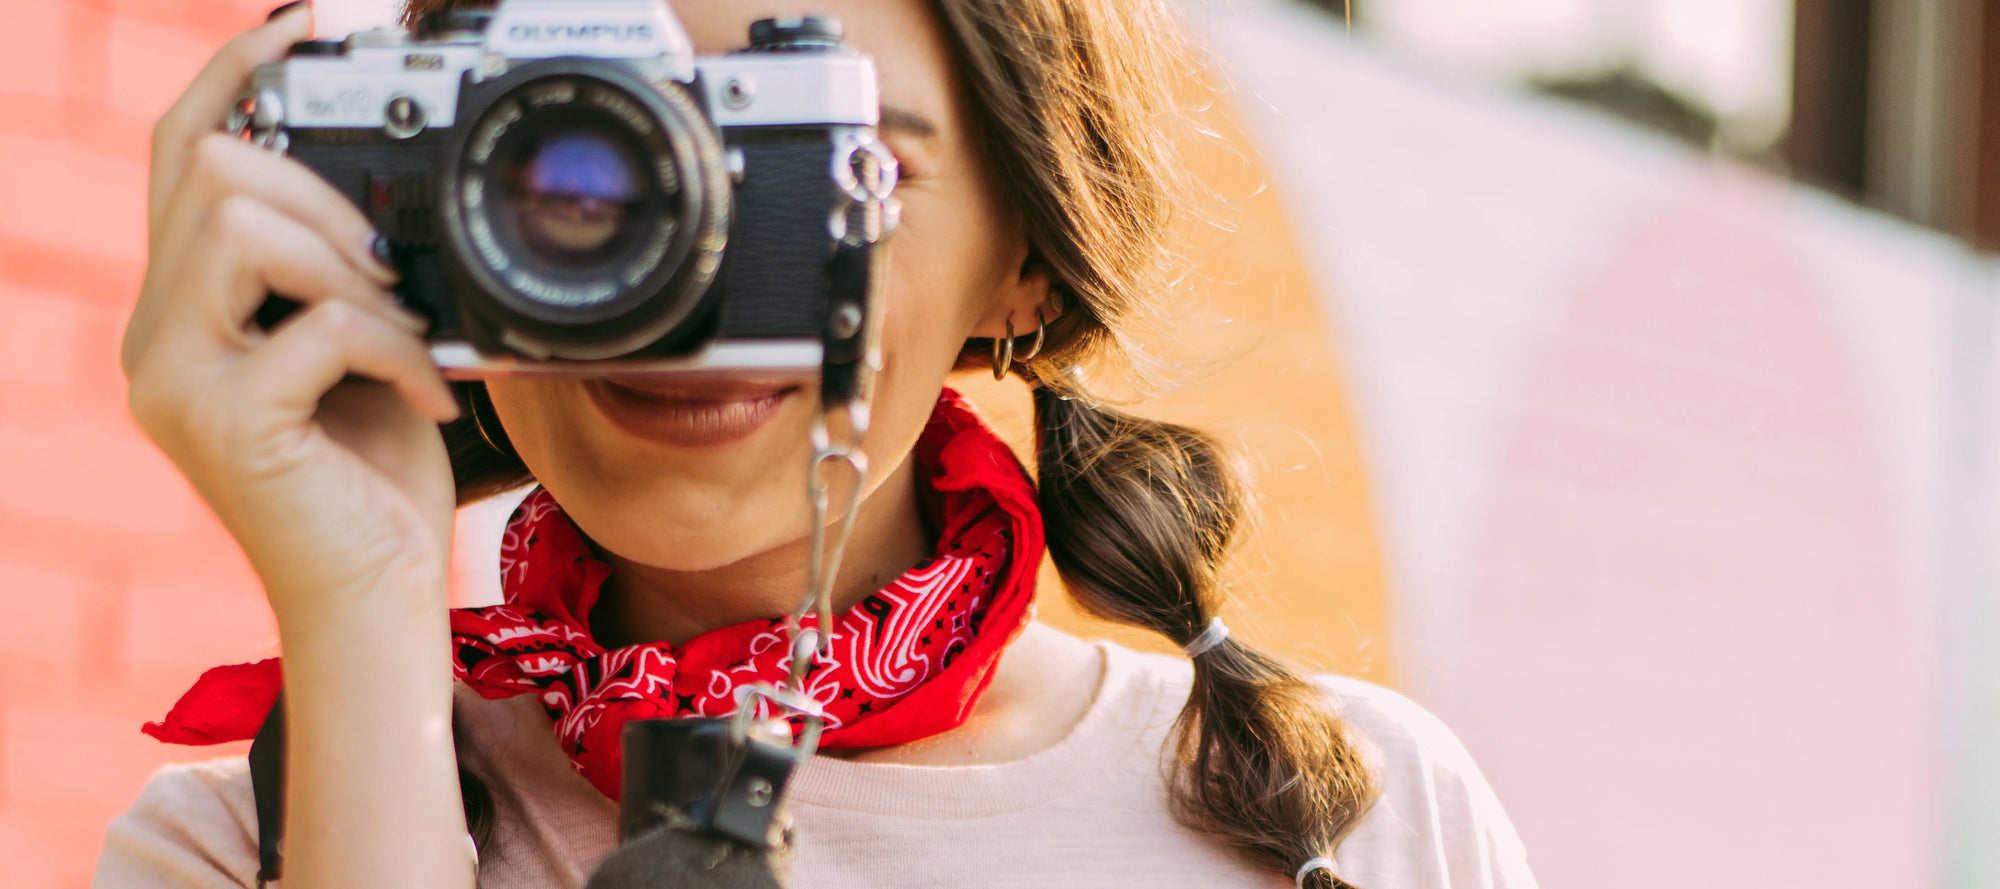 Girl holds a camera and wears a red bandana around her neck